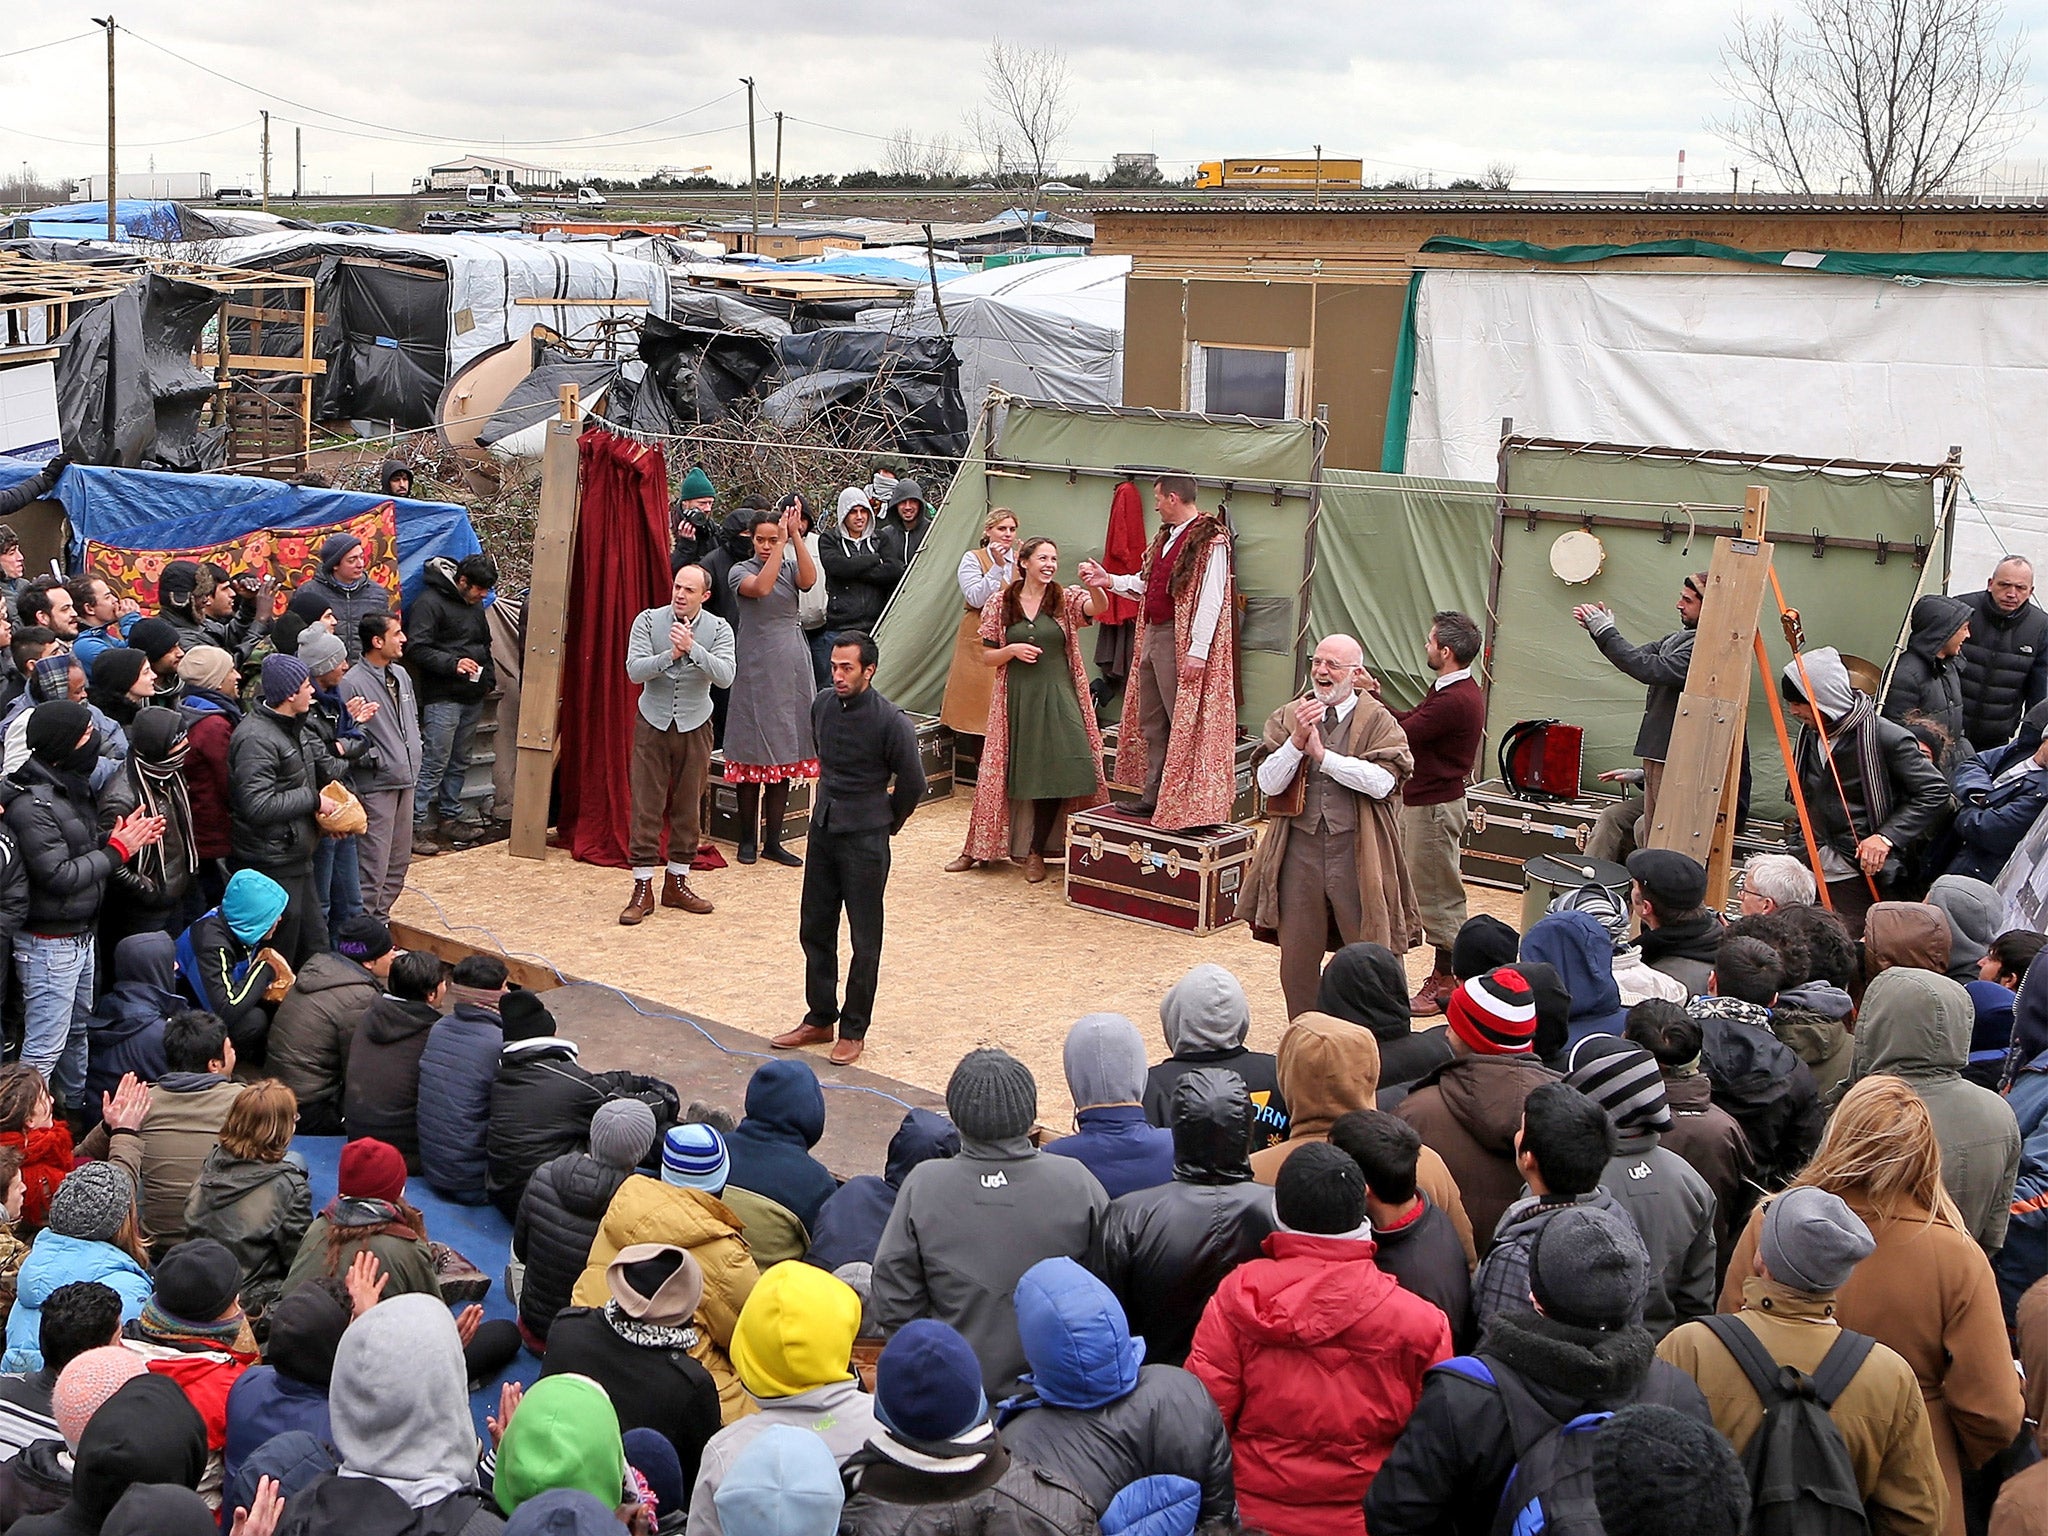 Residents of the Jungle, in Calais, gather to watch the Globe perform ‘Hamlet’ outside the Good Chance Theatre Tent